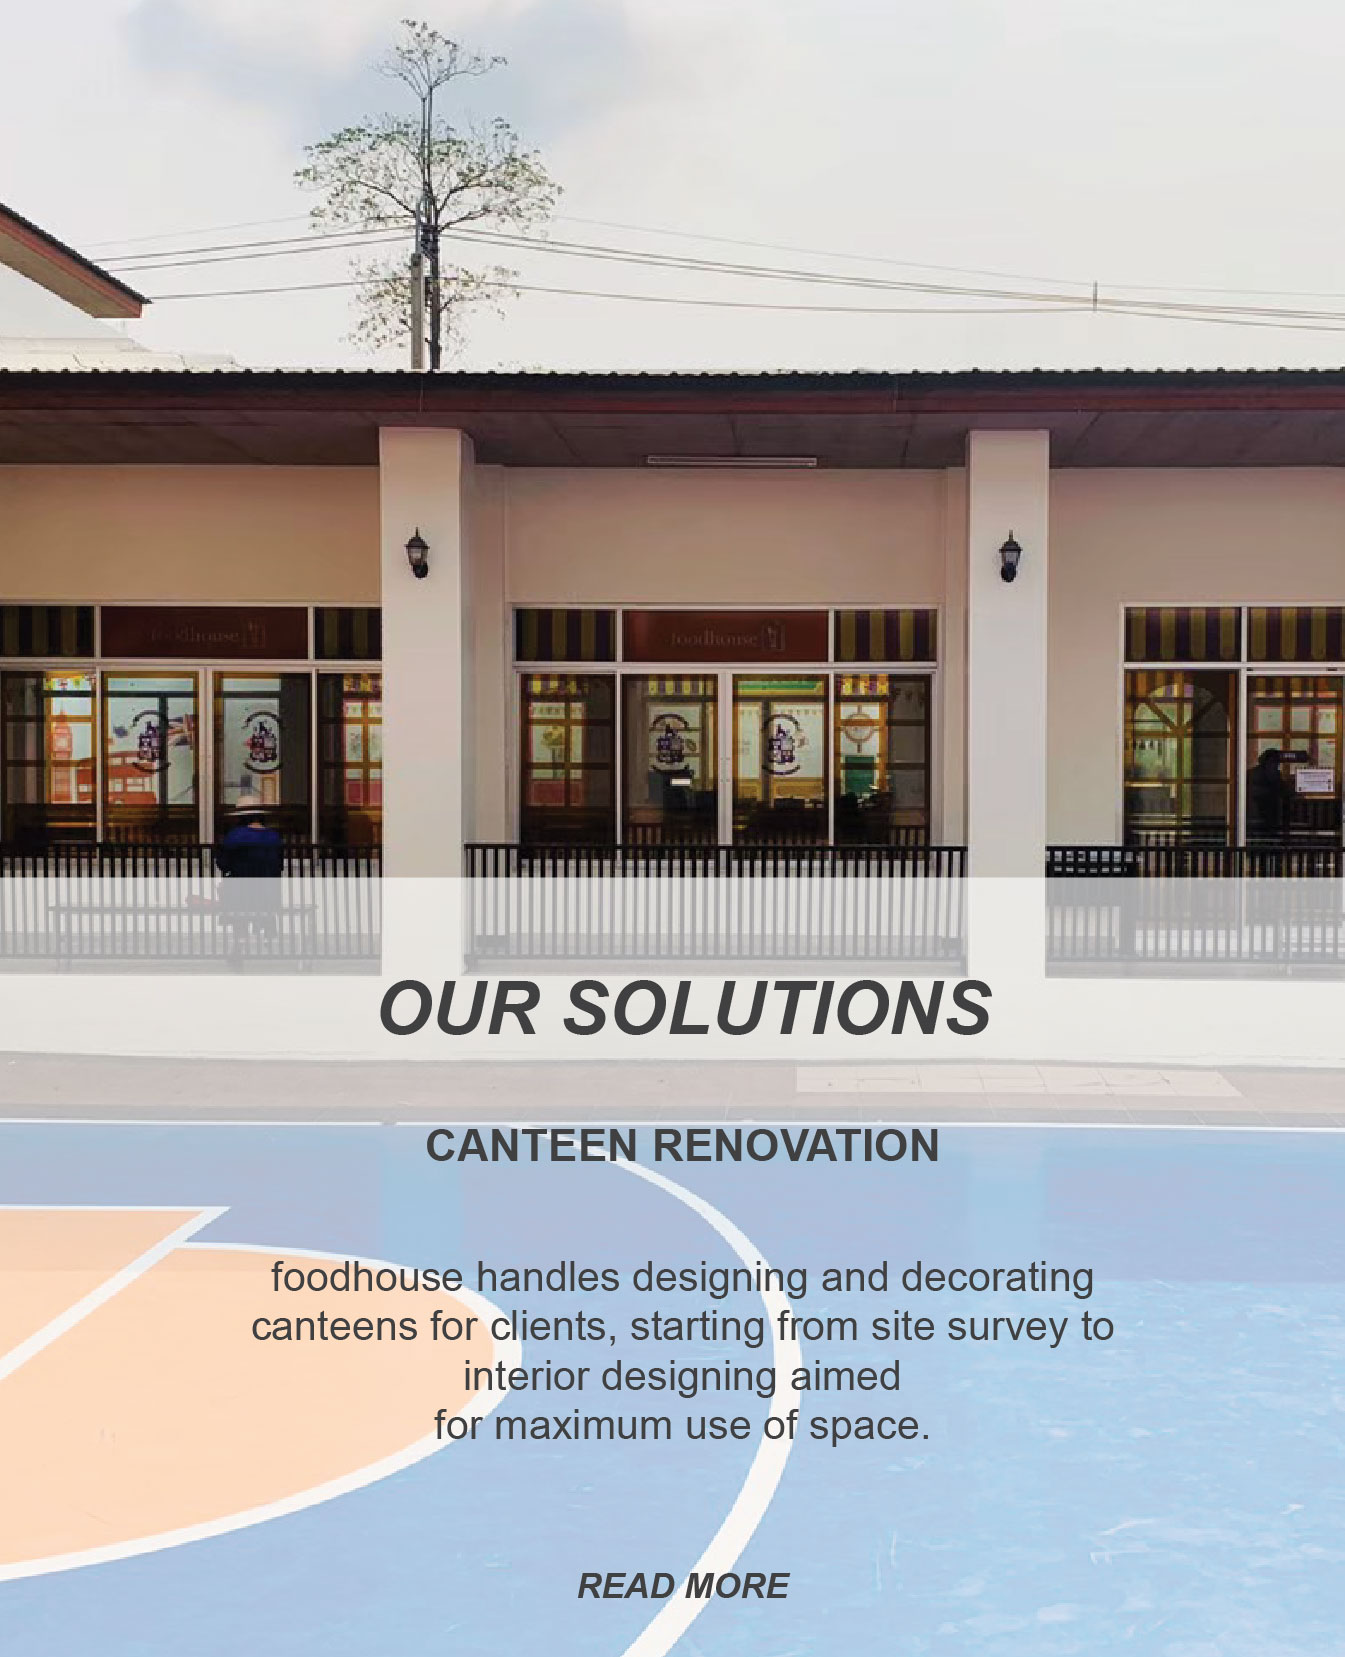 canteen renovation on design and decorate, starting from site survey to interior designing aimed for maximum use of space - foodhouse